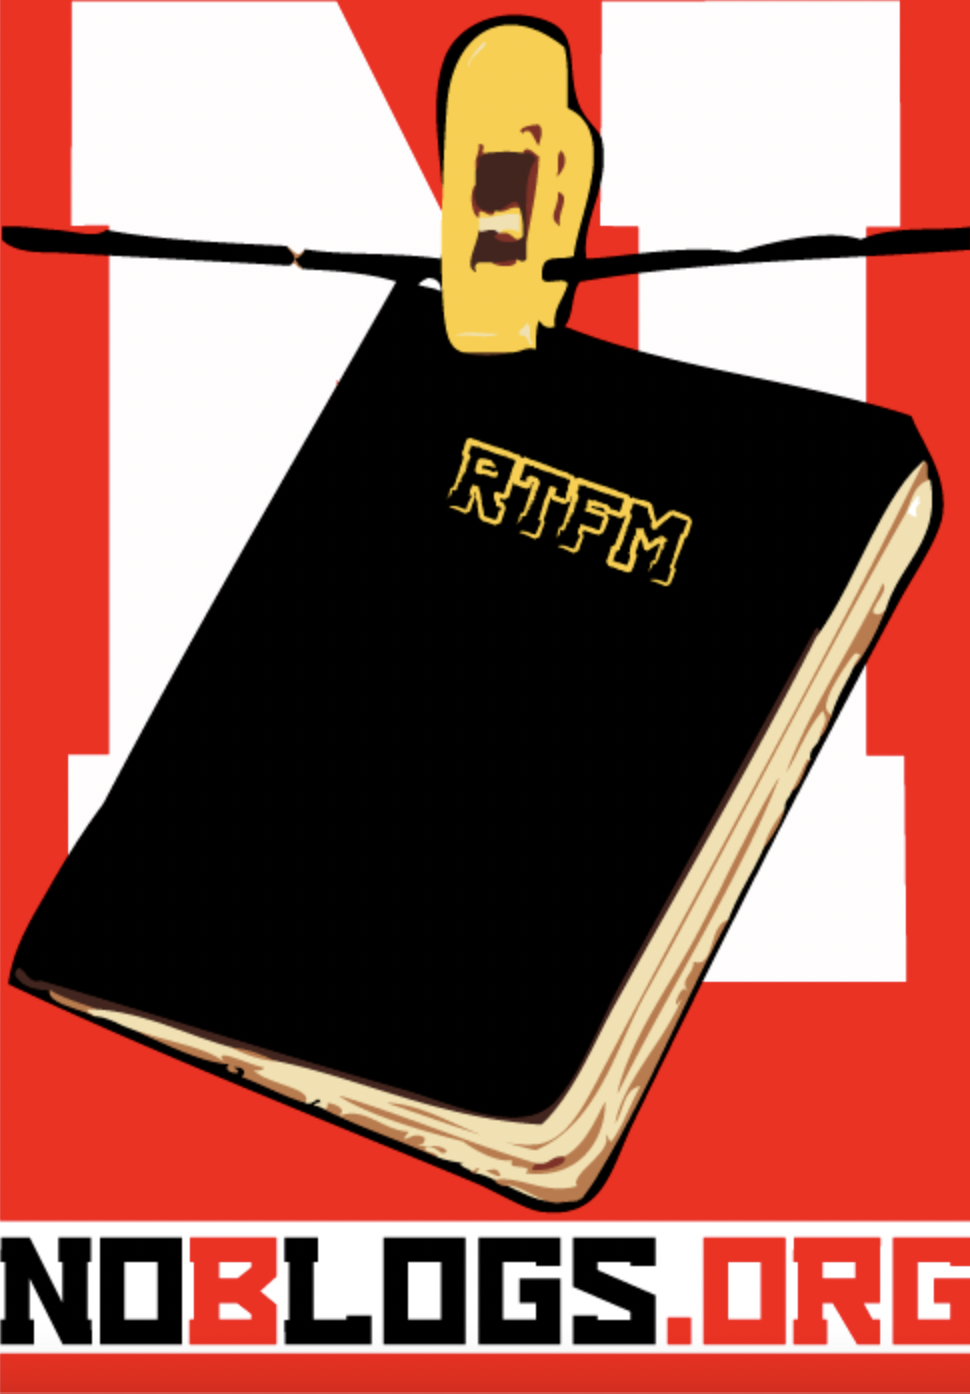 a book hanging on a clothes line, with RTFM written on the front. Behind is a large letter N on a red background. Beneth the text says noblogs.org